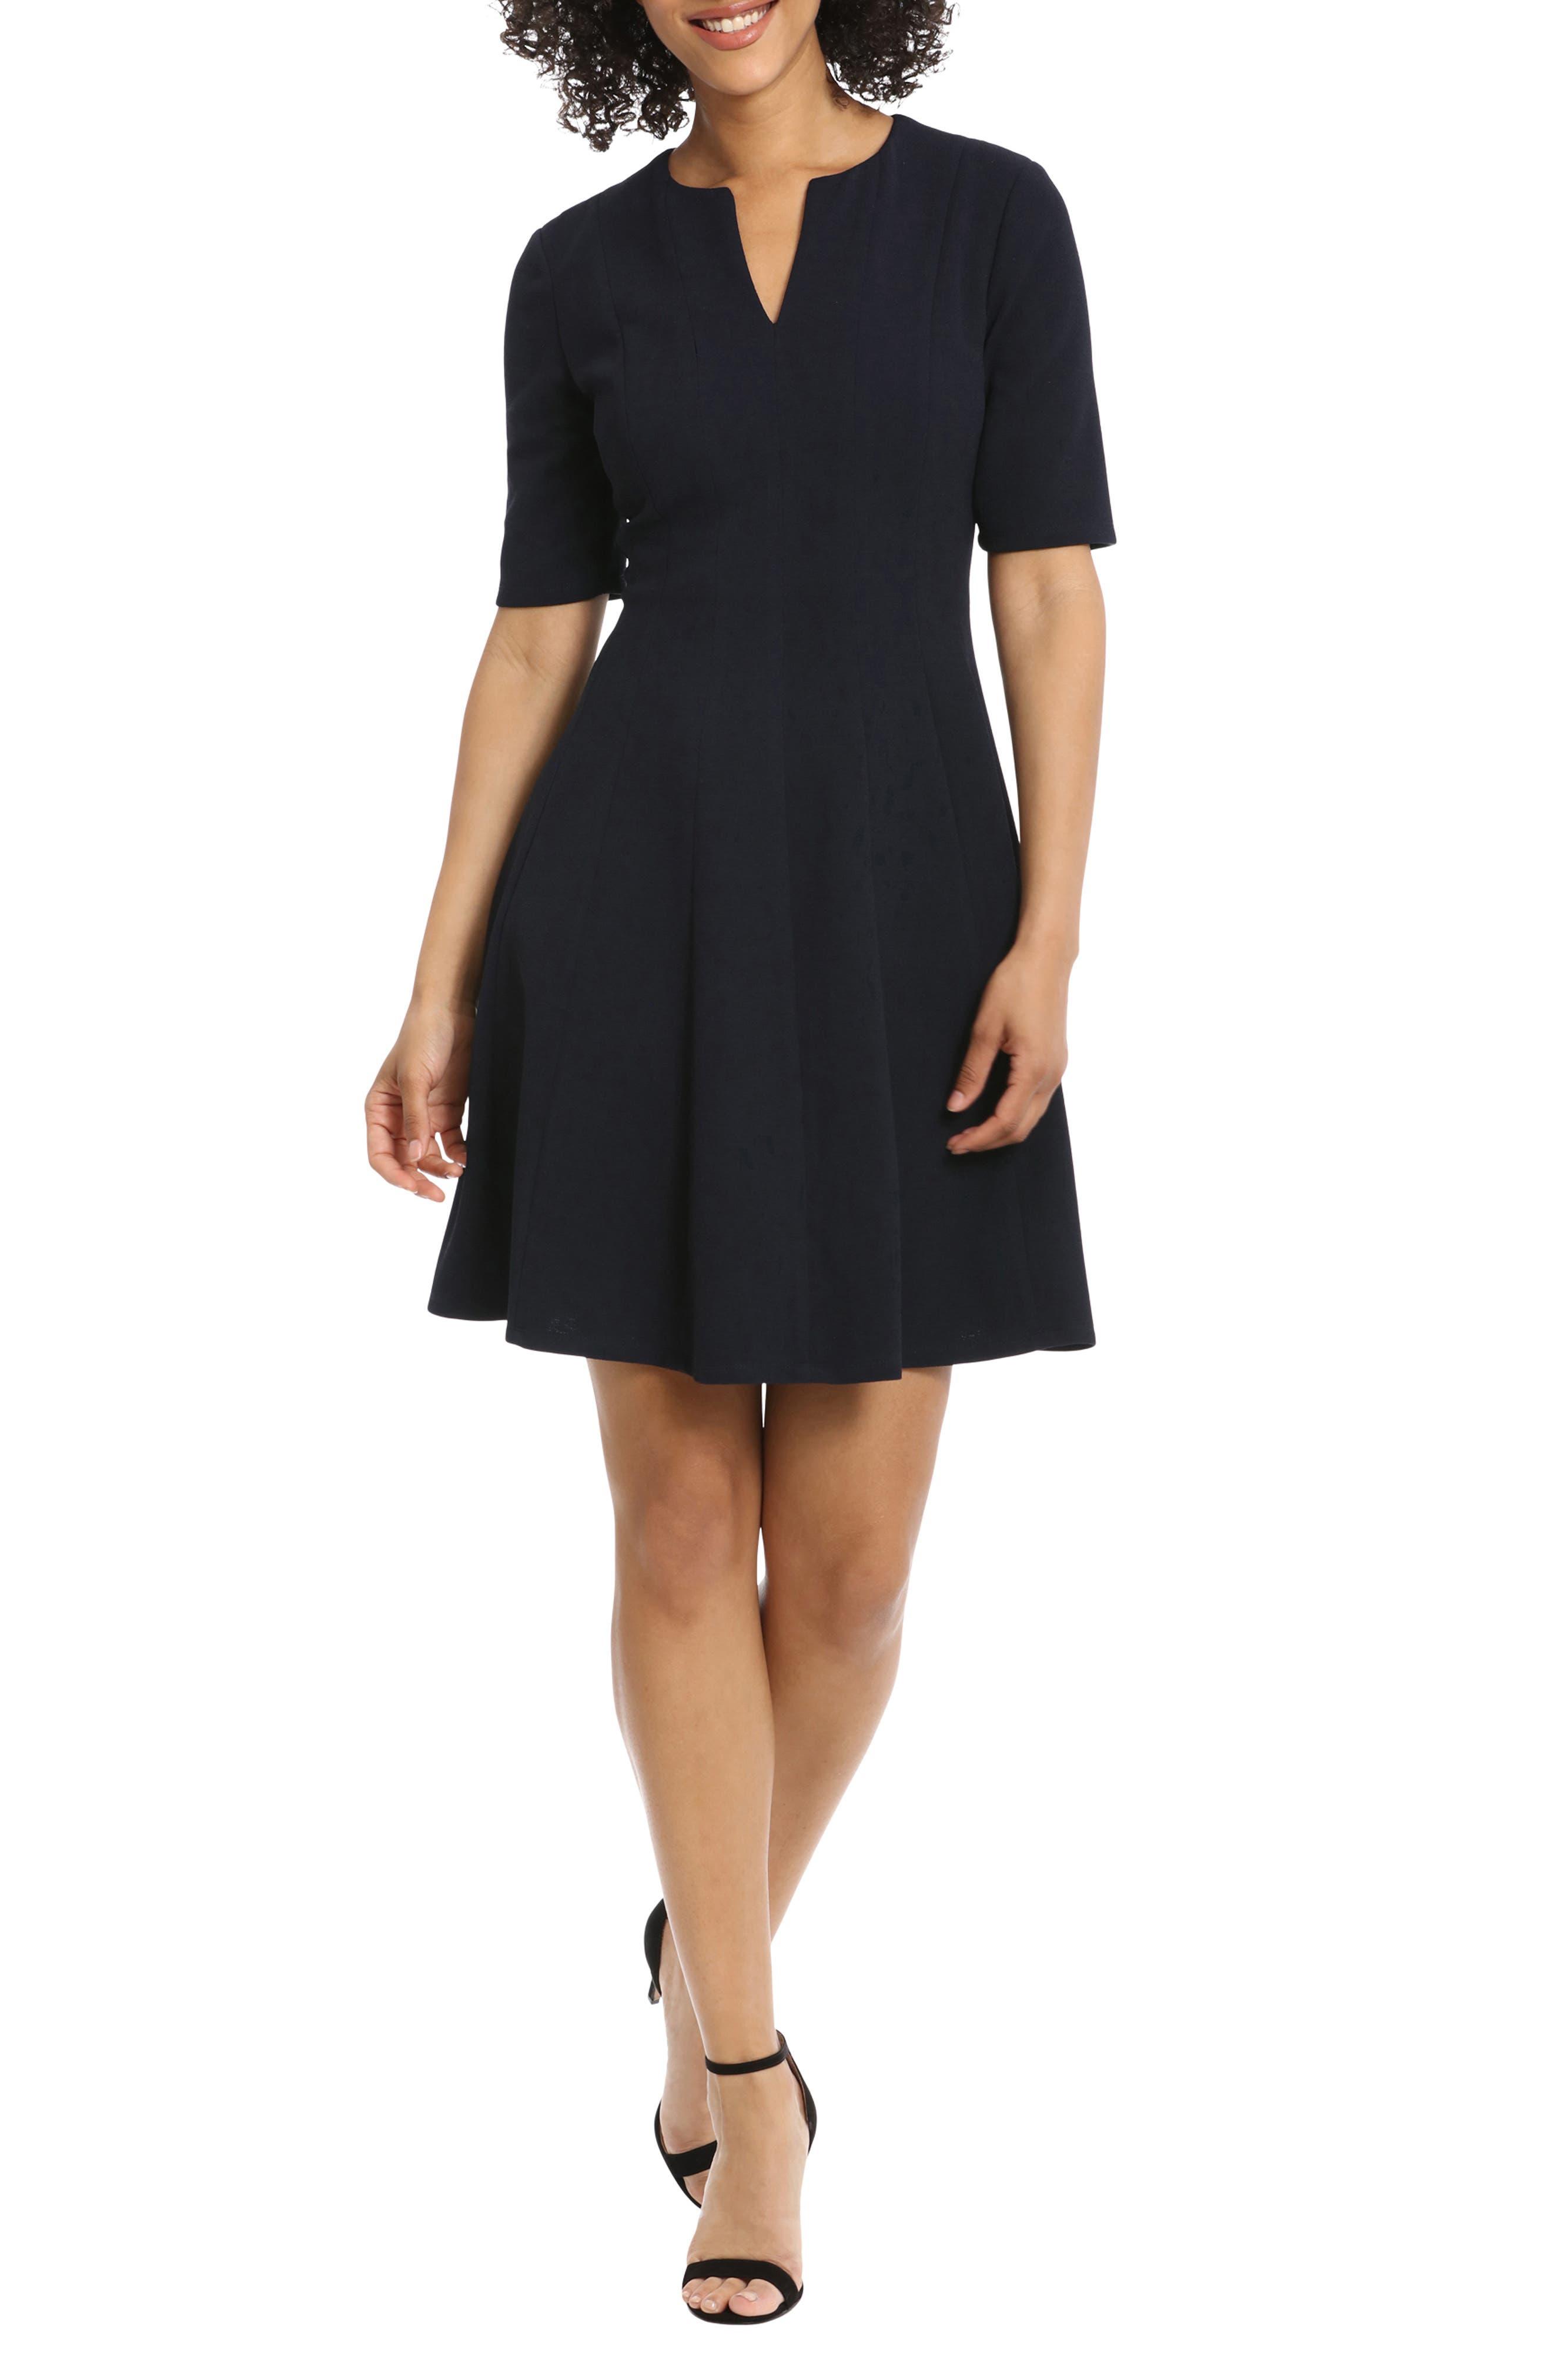 Maggy London Short Sleeve Fit & Flare Dress in Black | Lyst